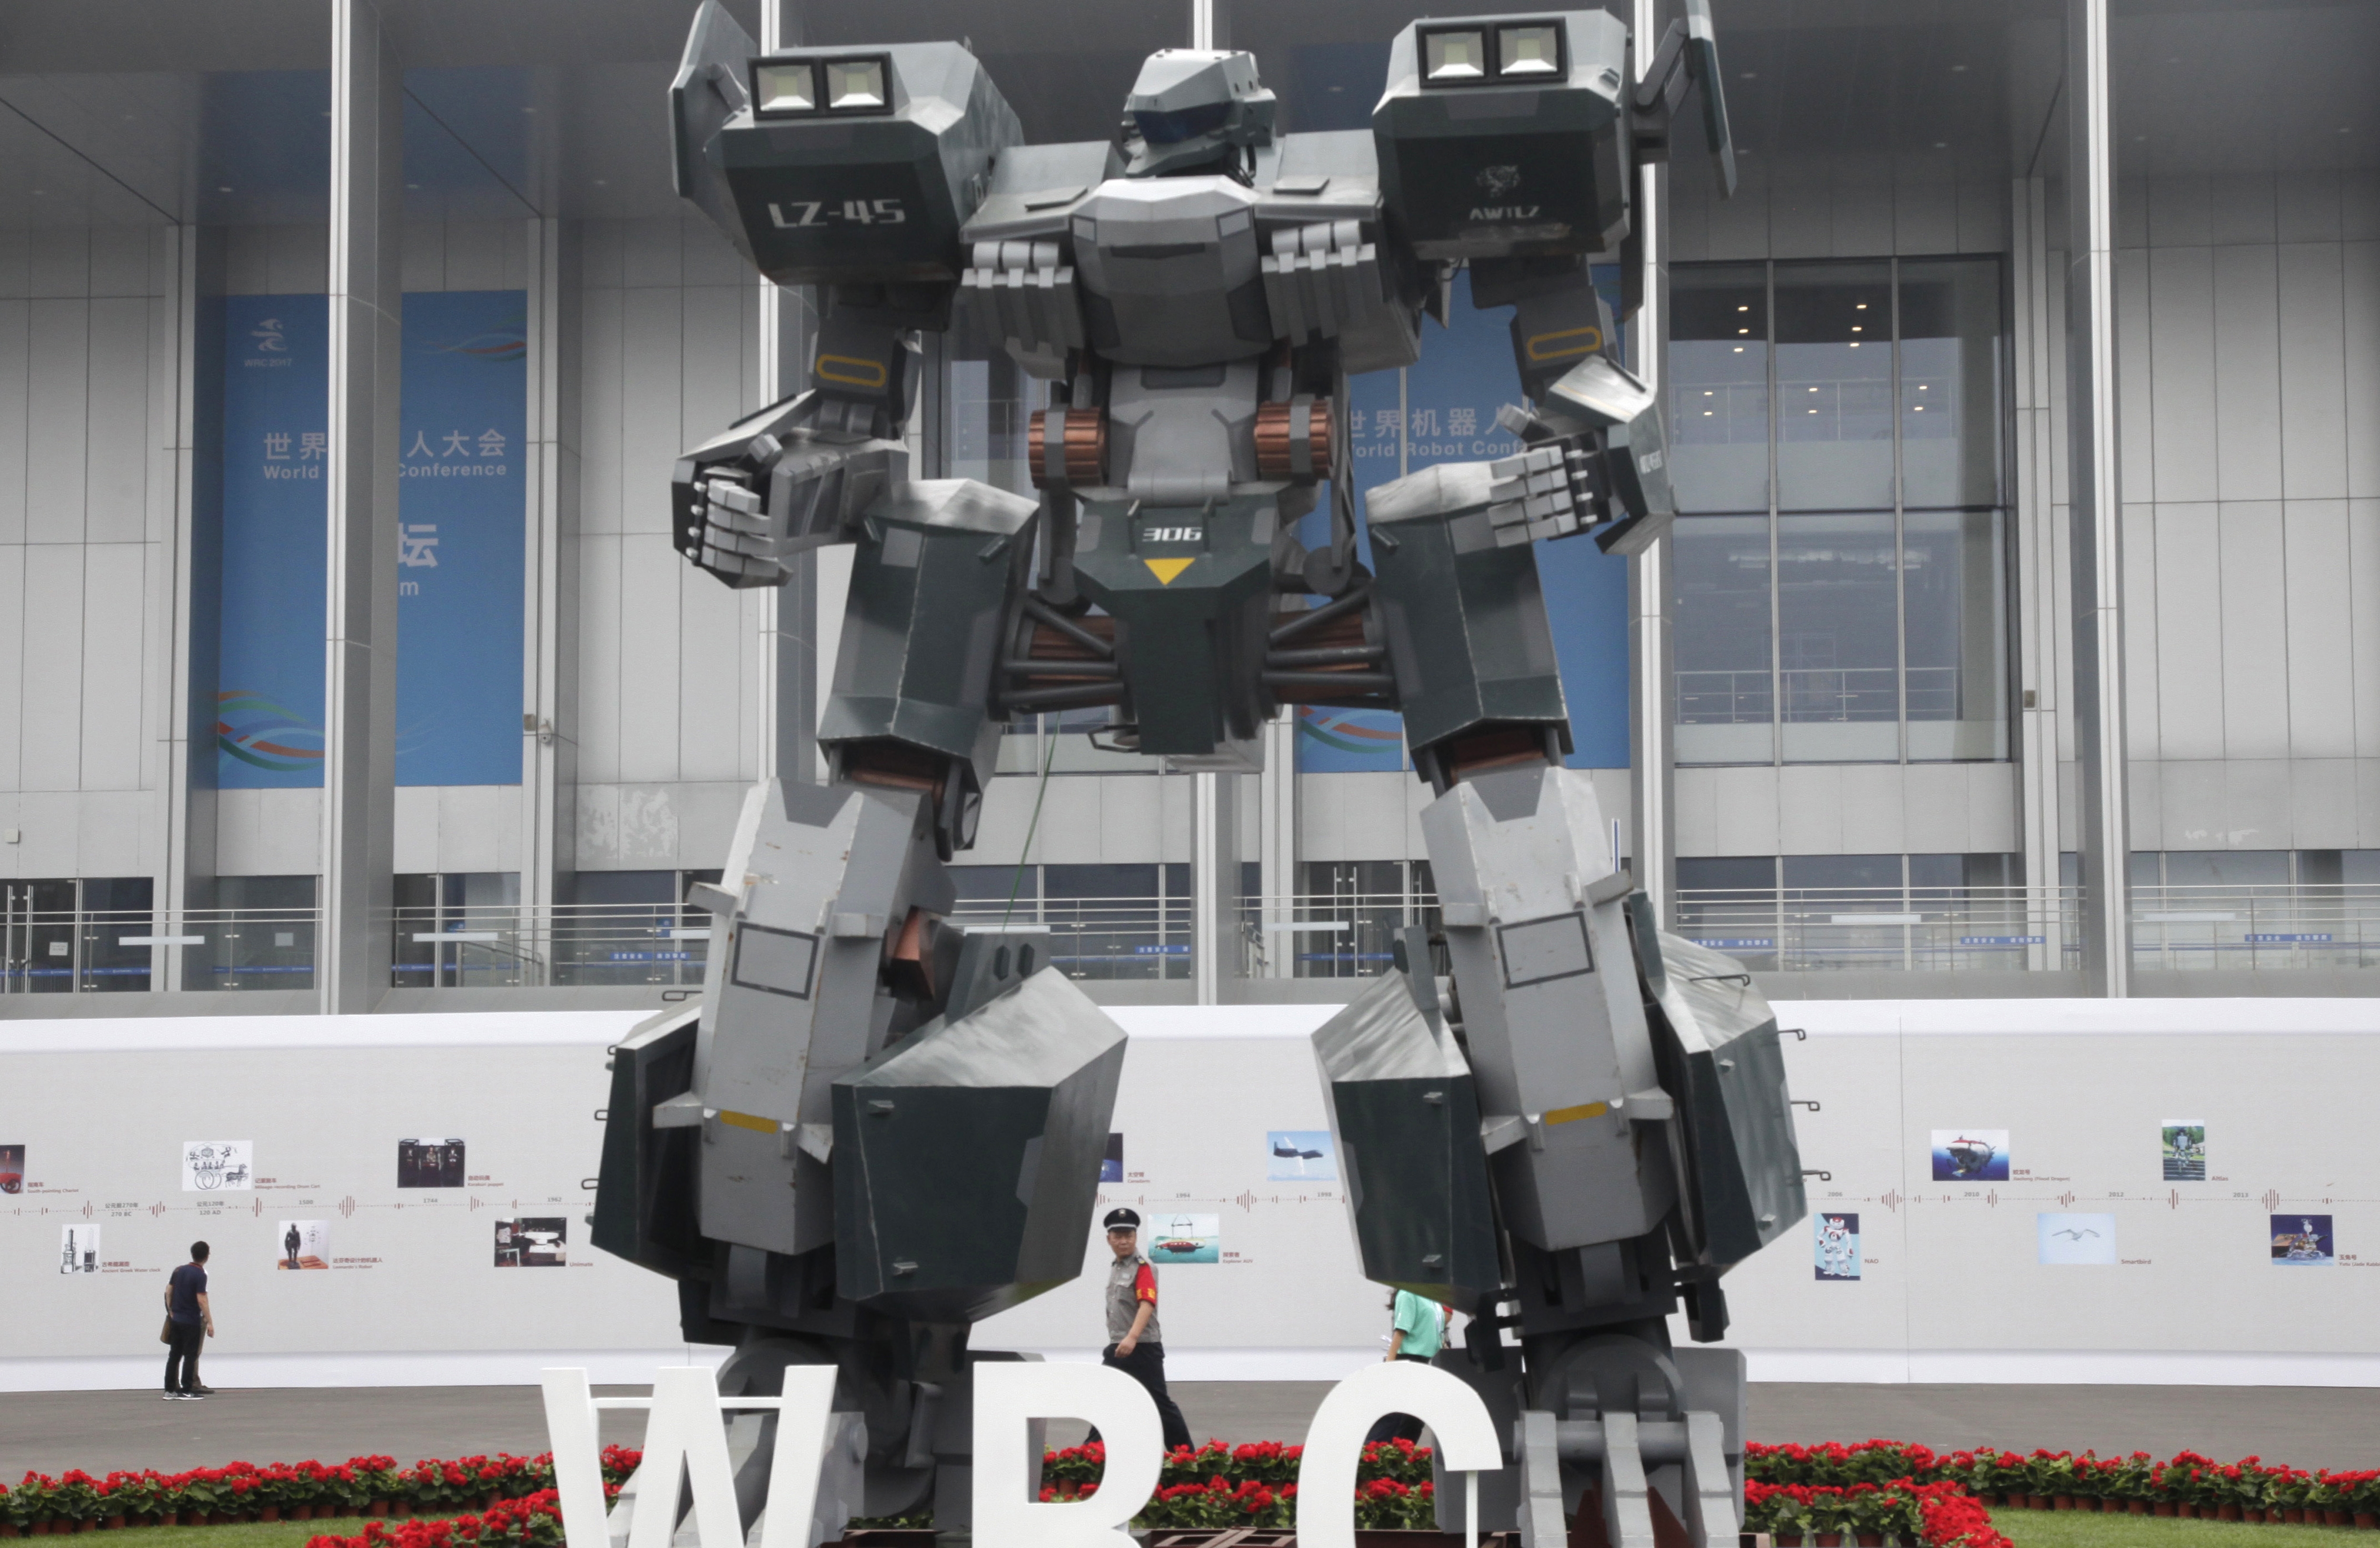 A security guard walks past a giant robot displayed at the World Robot Conference held in Beijing, China, Tuesday, Aug. 22, 2017. The annual conference is a showcase of China's burgeoning robot industry ranging from companion robots to those deployed on manufacturing assembly line and entertainement.  (AP Photo/Fu Ting)